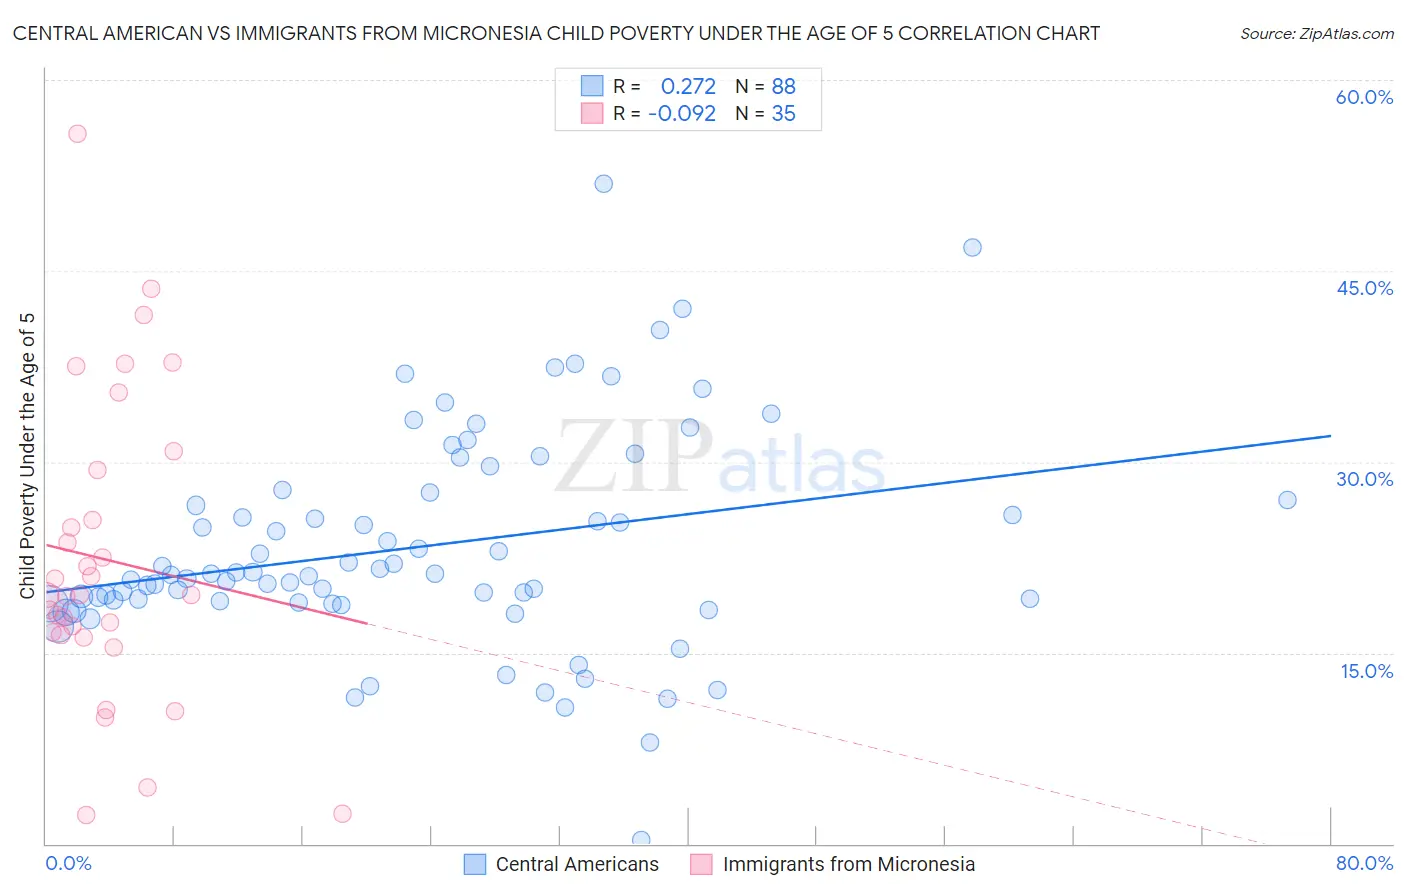 Central American vs Immigrants from Micronesia Child Poverty Under the Age of 5